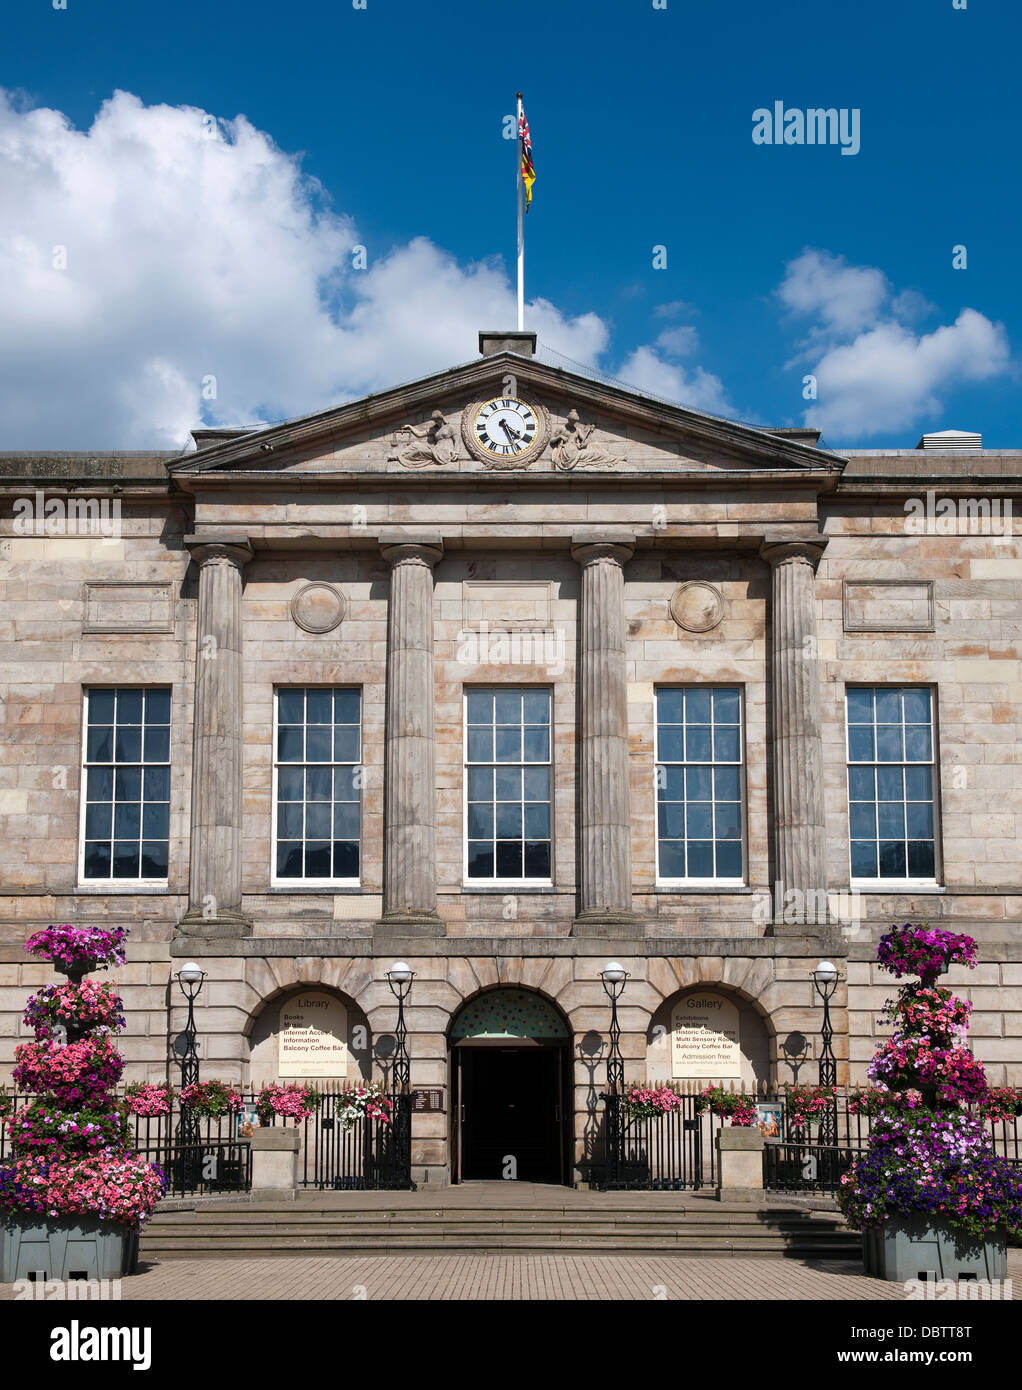 Market Square, Stafford, showing the front of the Shire Hall, Staffordshire, England, UK. Stock Photo